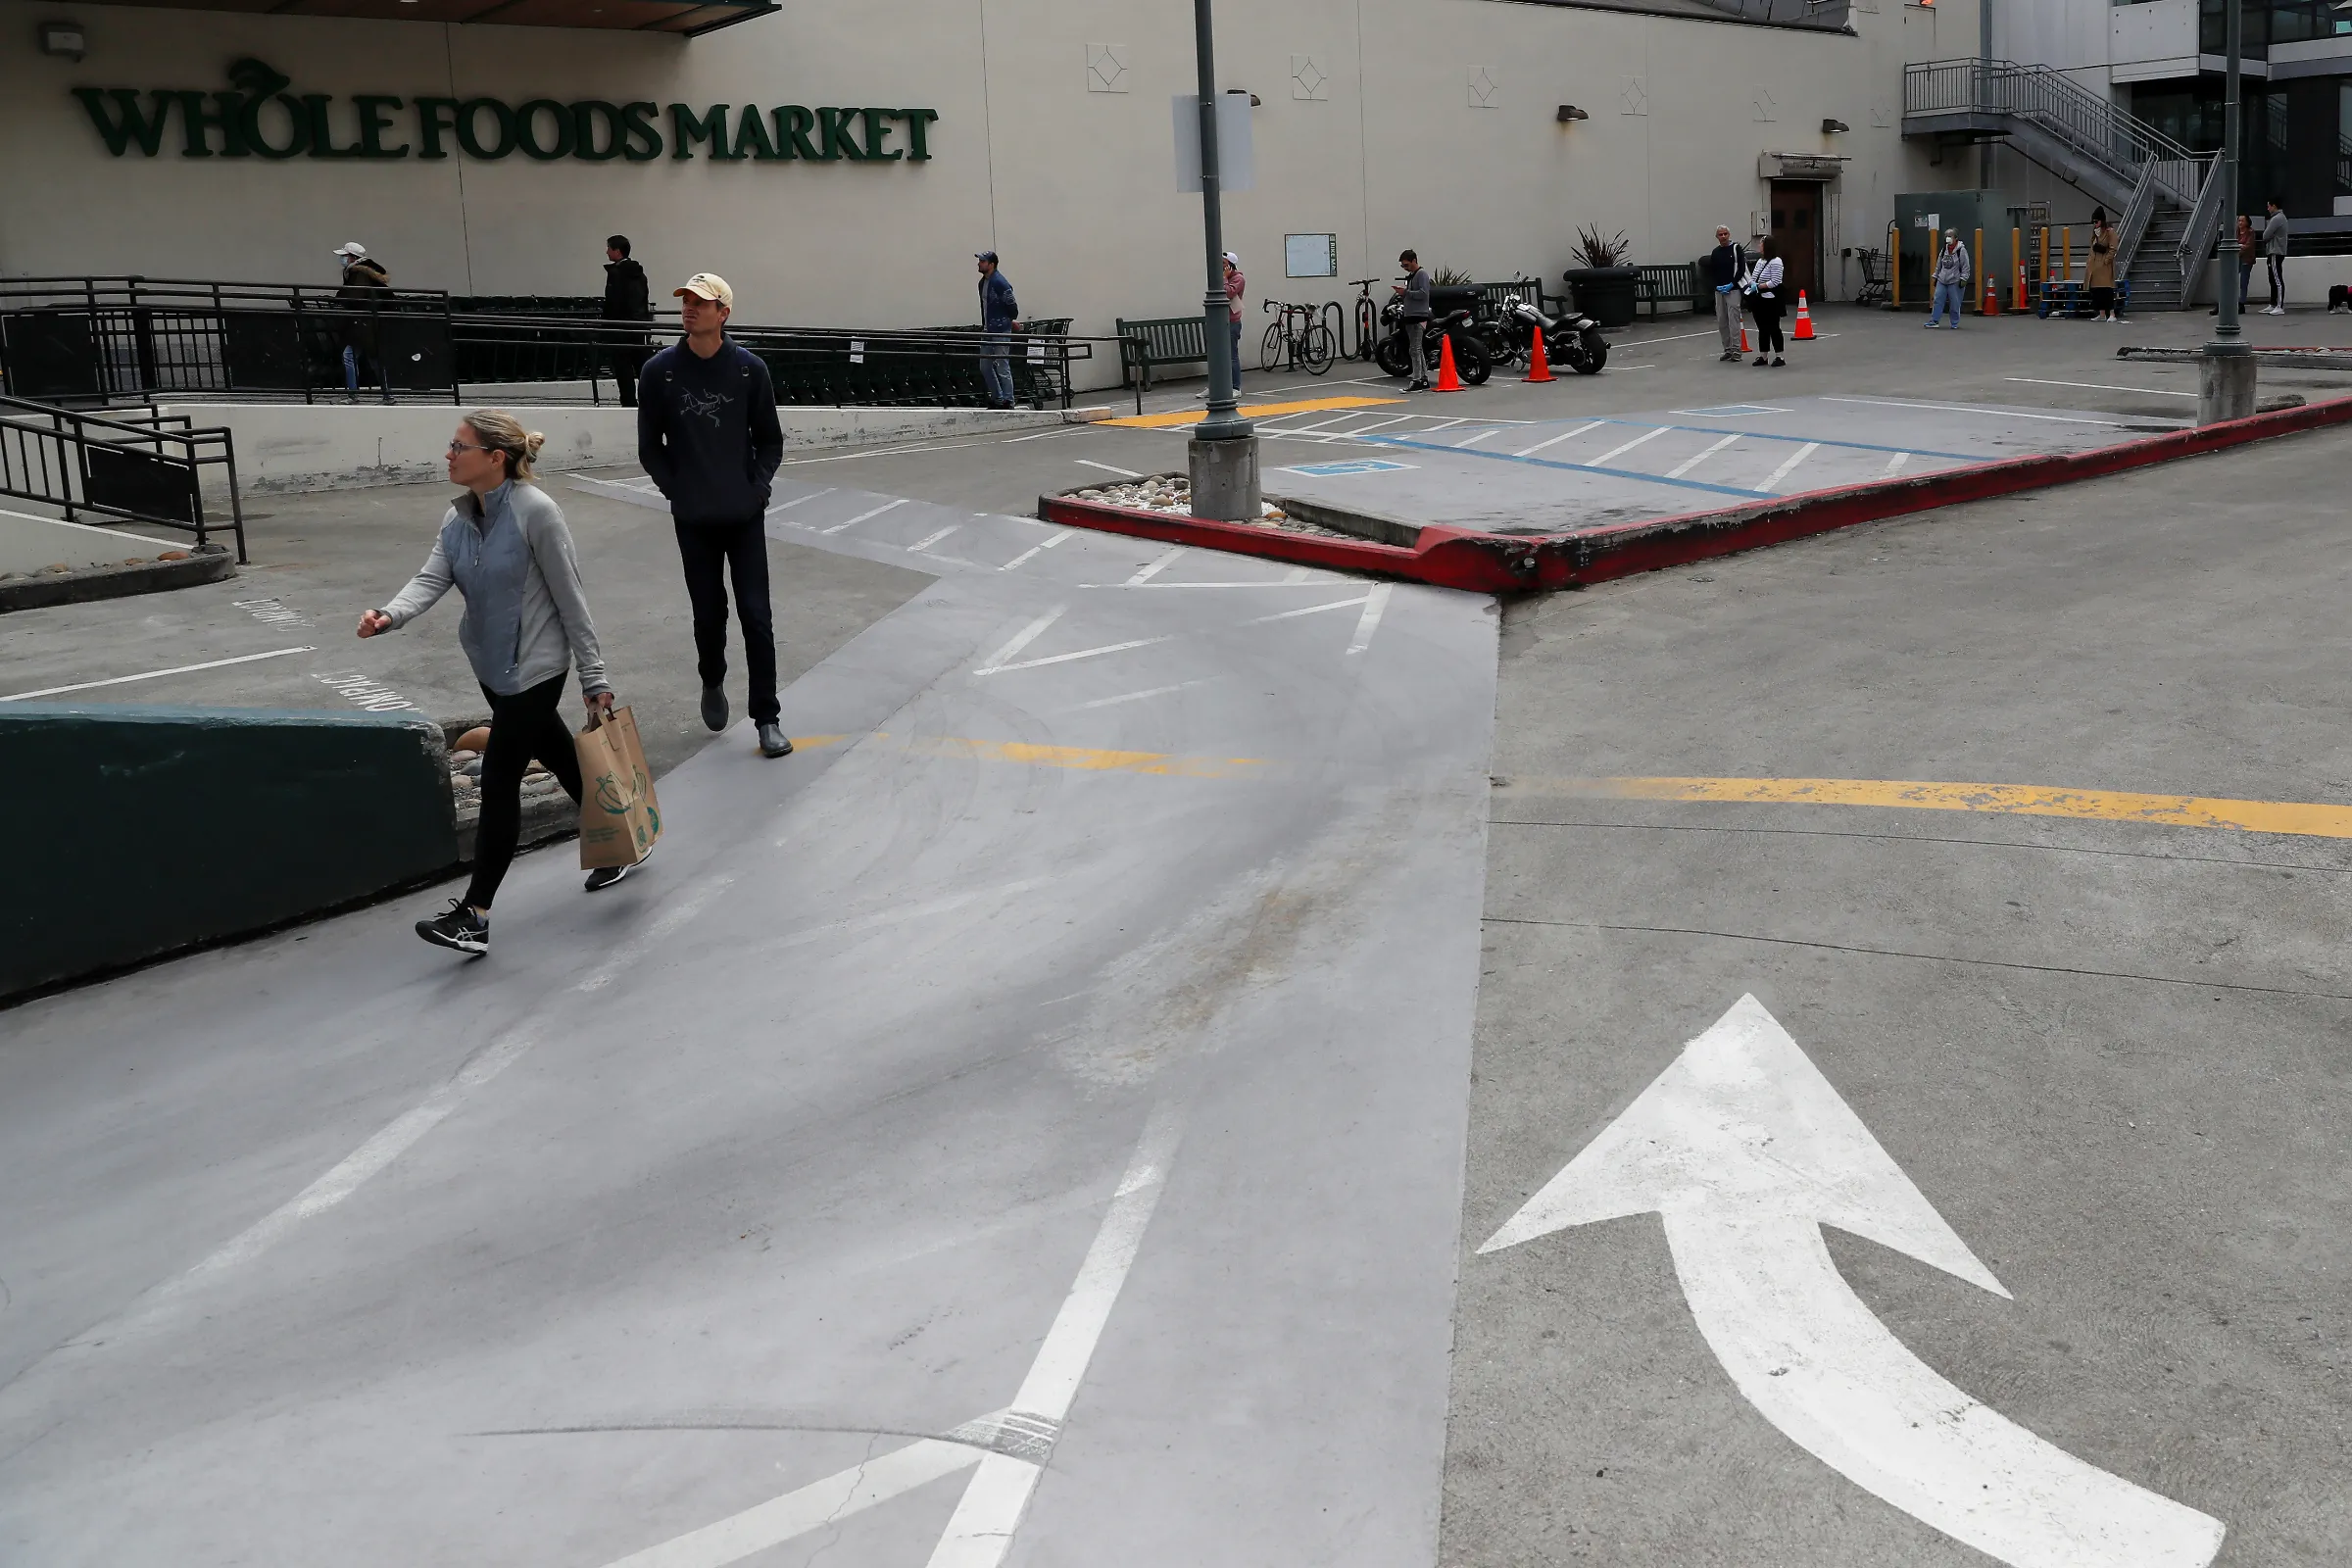 People wait in line practicing social distance at a Whole Foods Market amid an outbreak of the coronavirus disease (COVID-19), in San Francisco, California, U.S., March 31, 2020